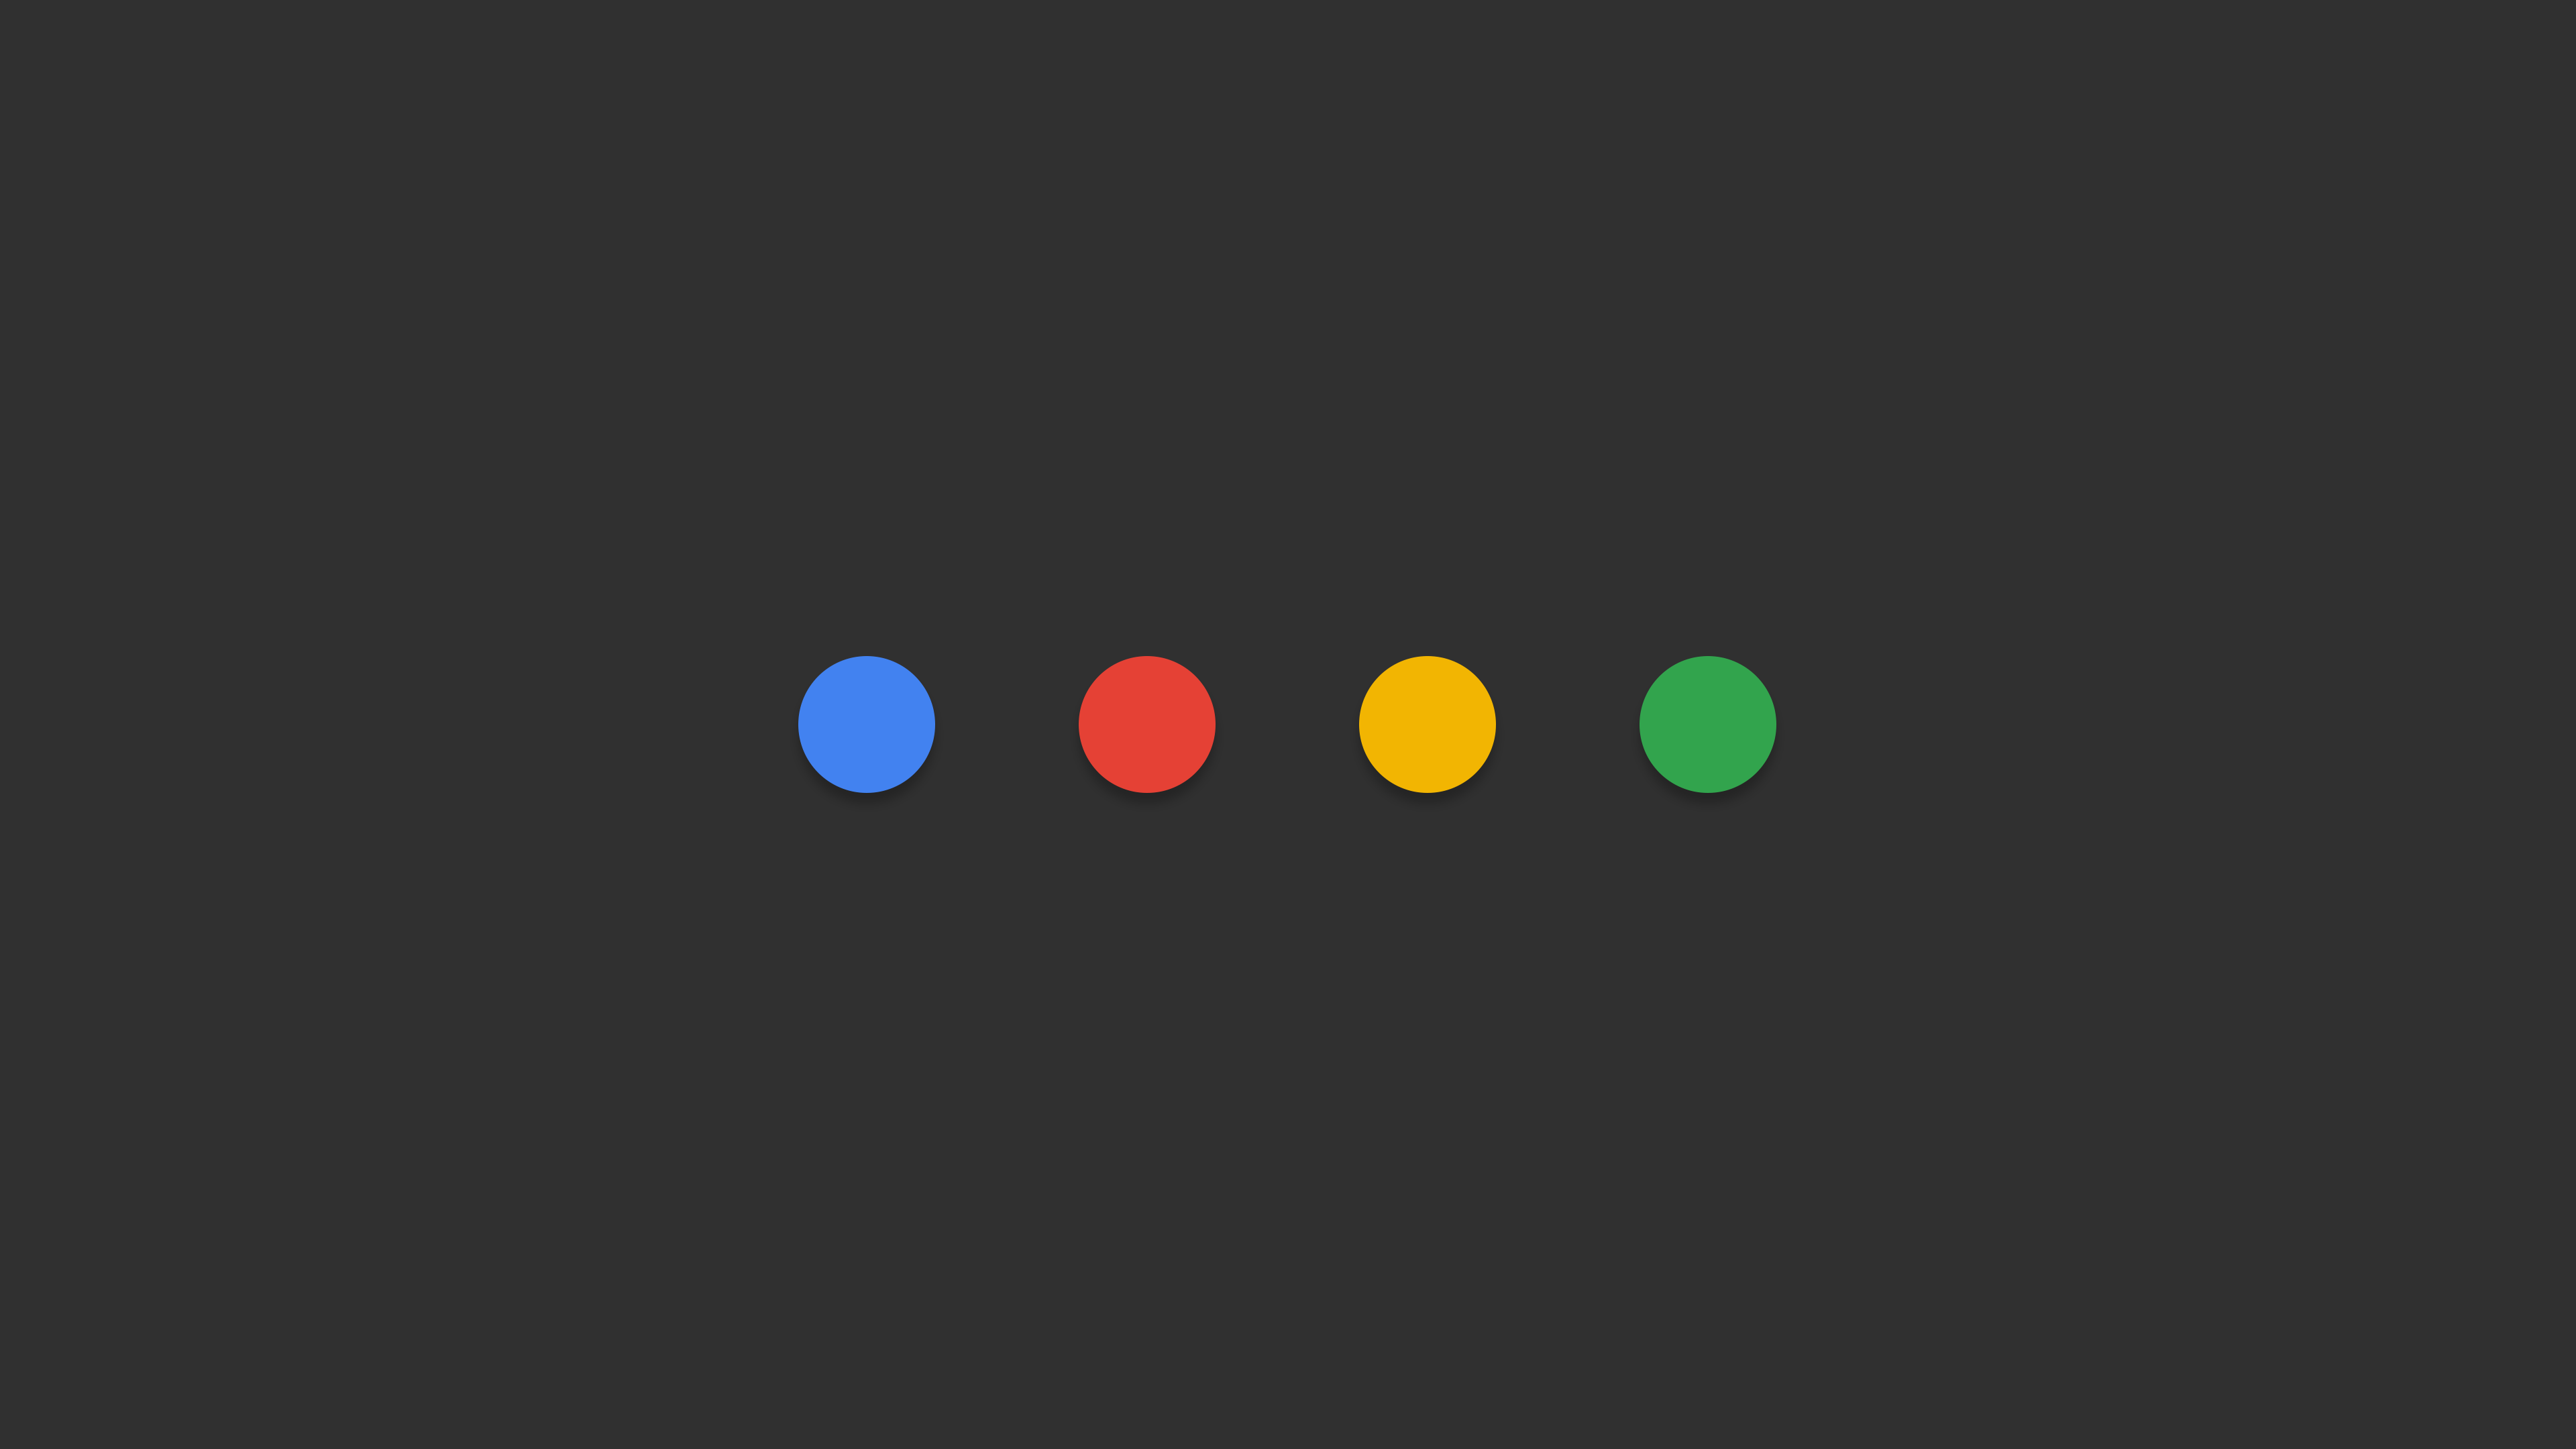 Quick Wallpaper I Made Of The Google Dots